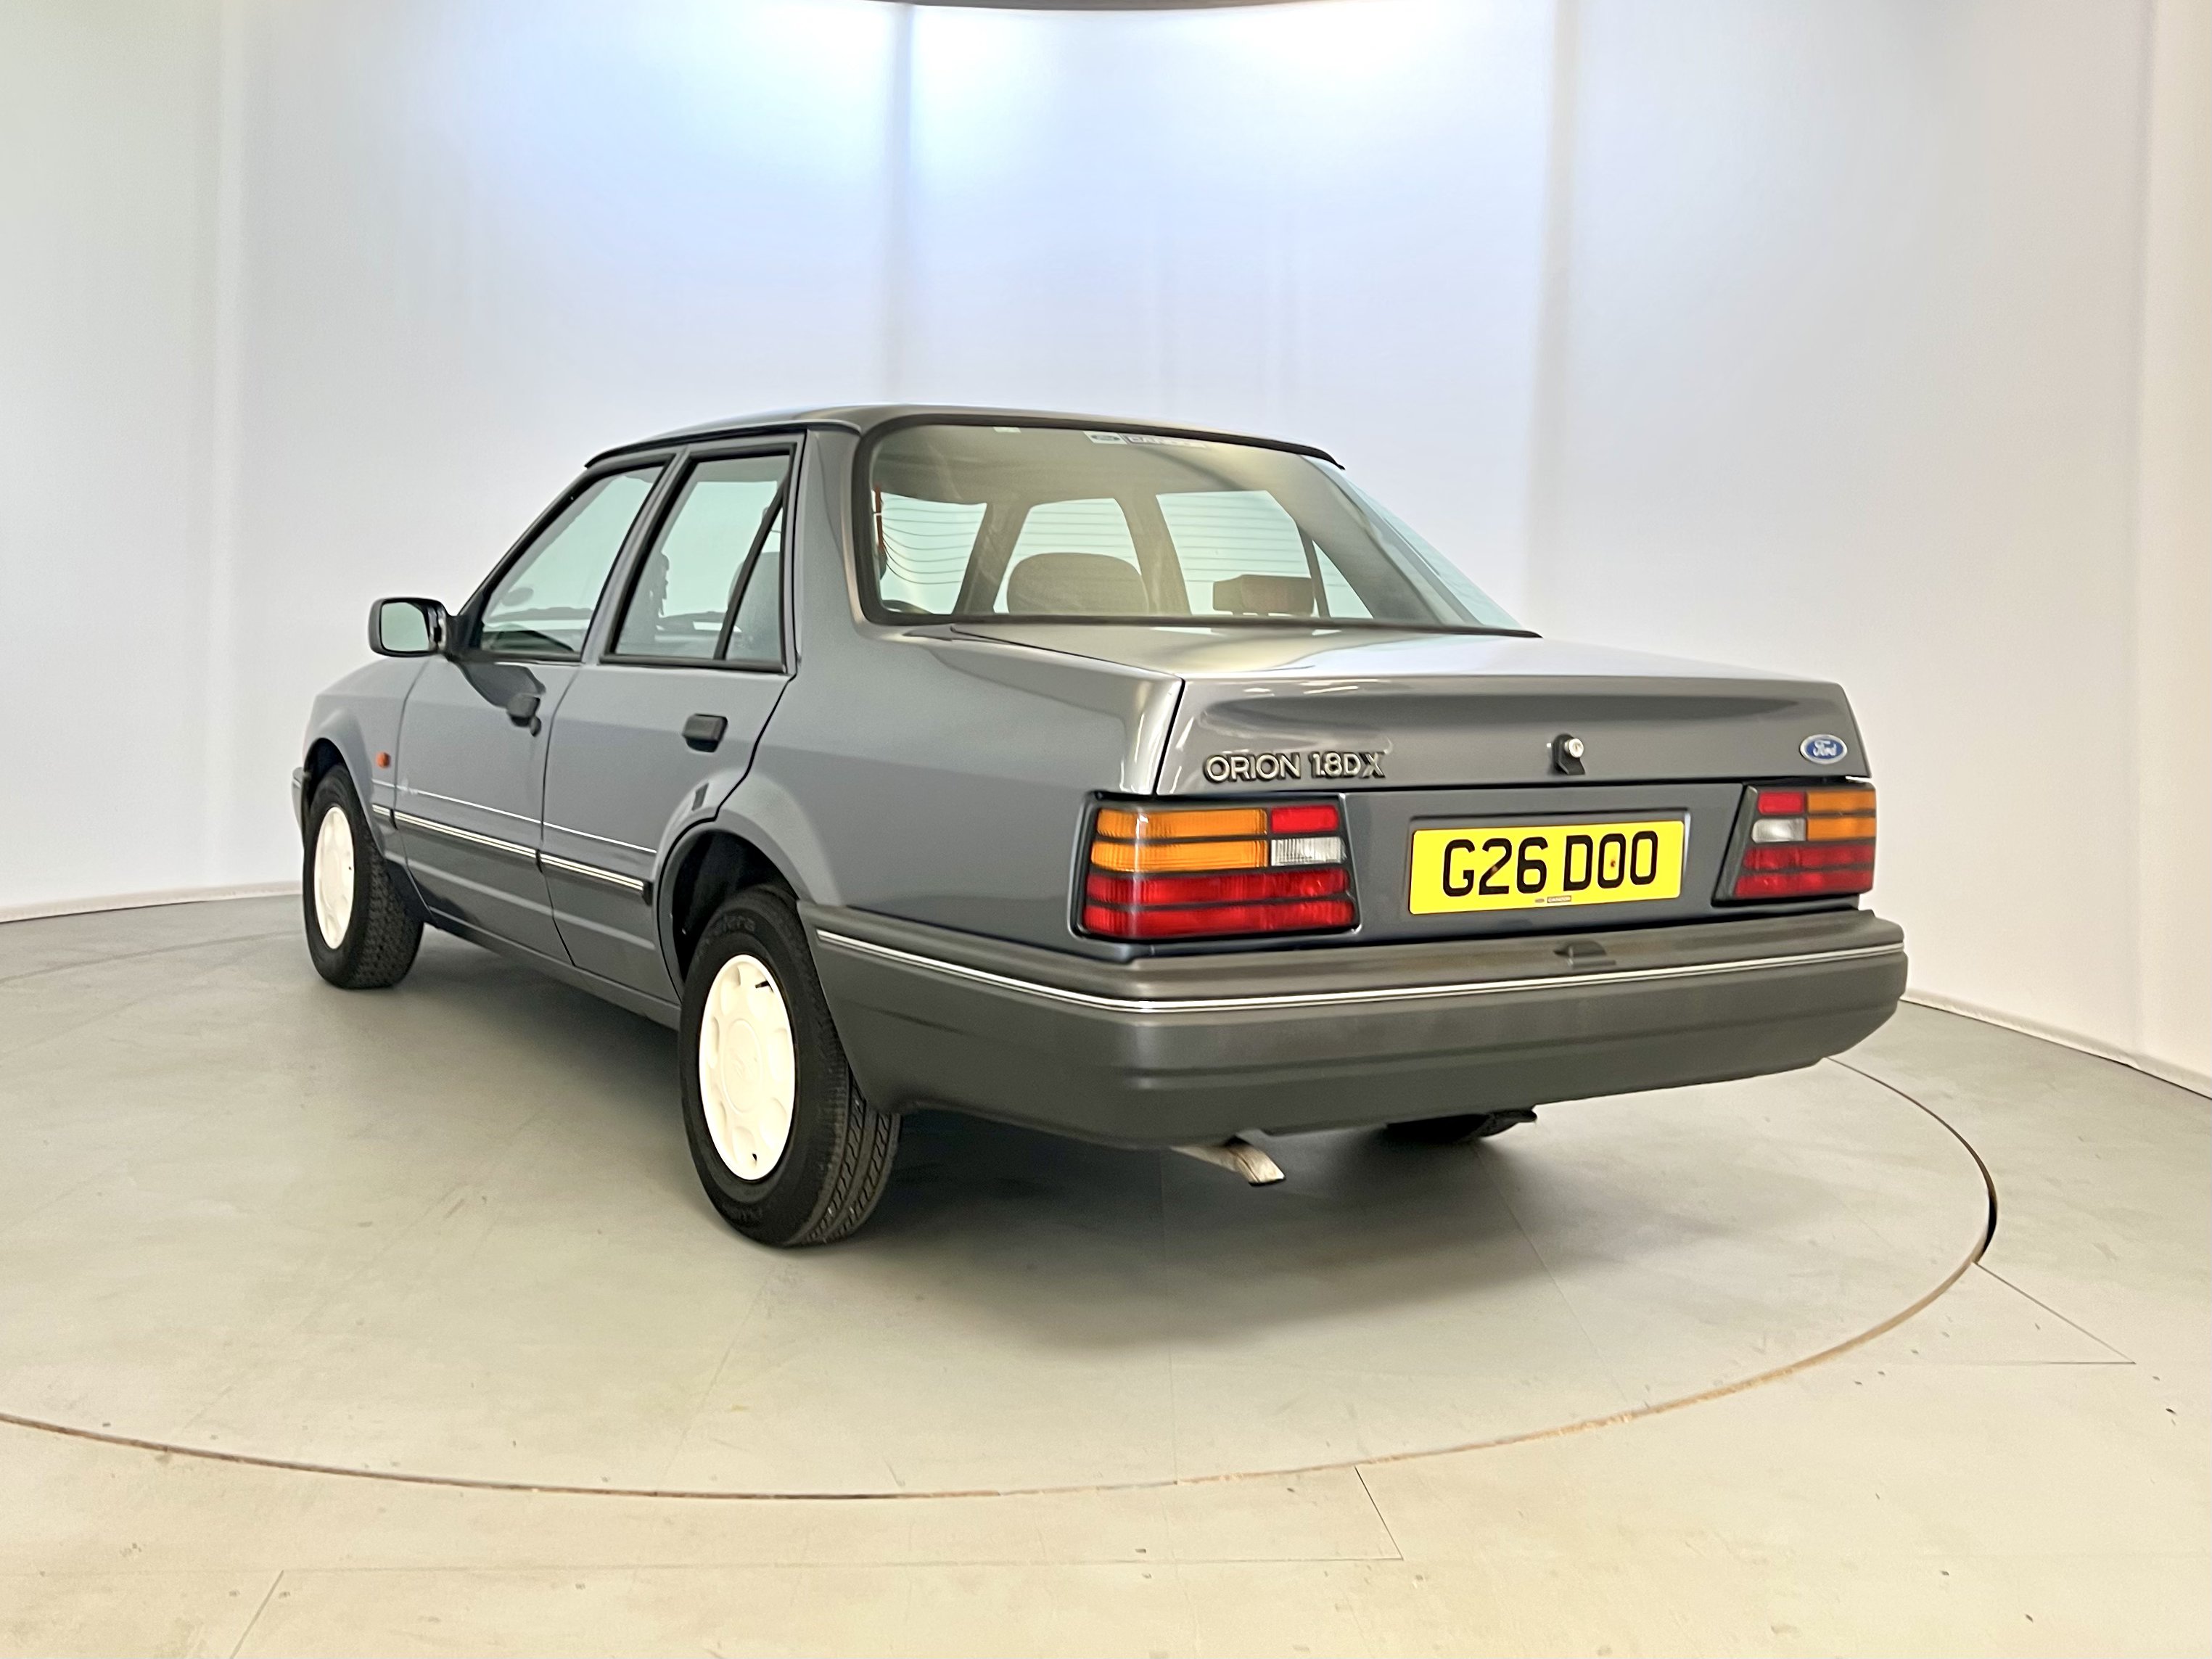 Ford Orion DX - Image 7 of 34